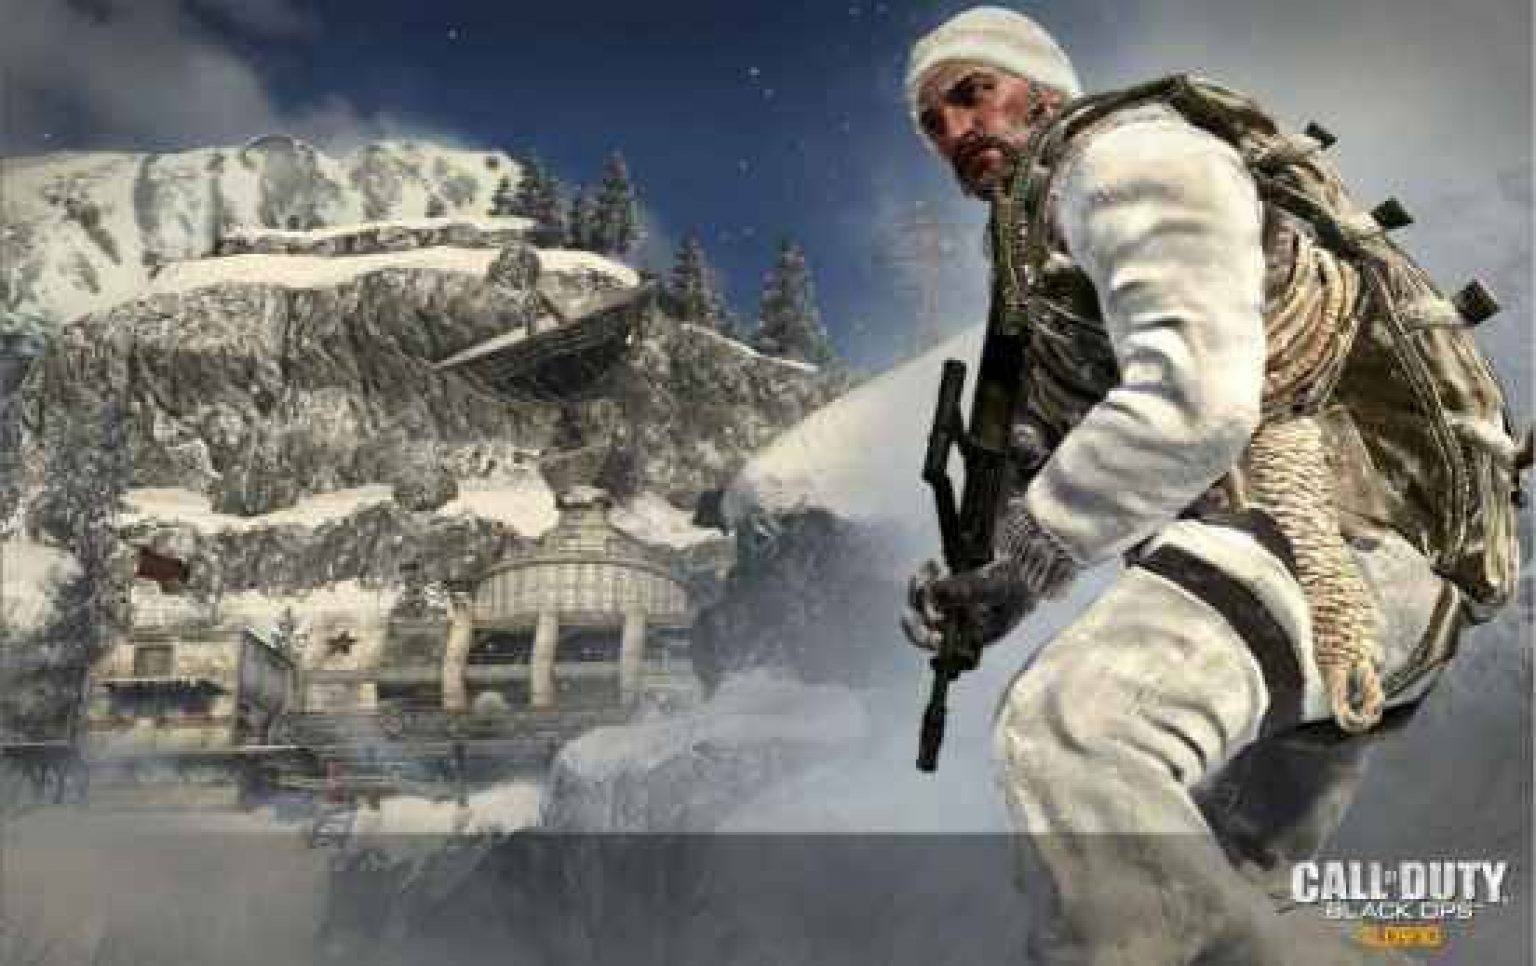 Call of Duty Black Ops 1 Download for Pc Highly Compressed 4